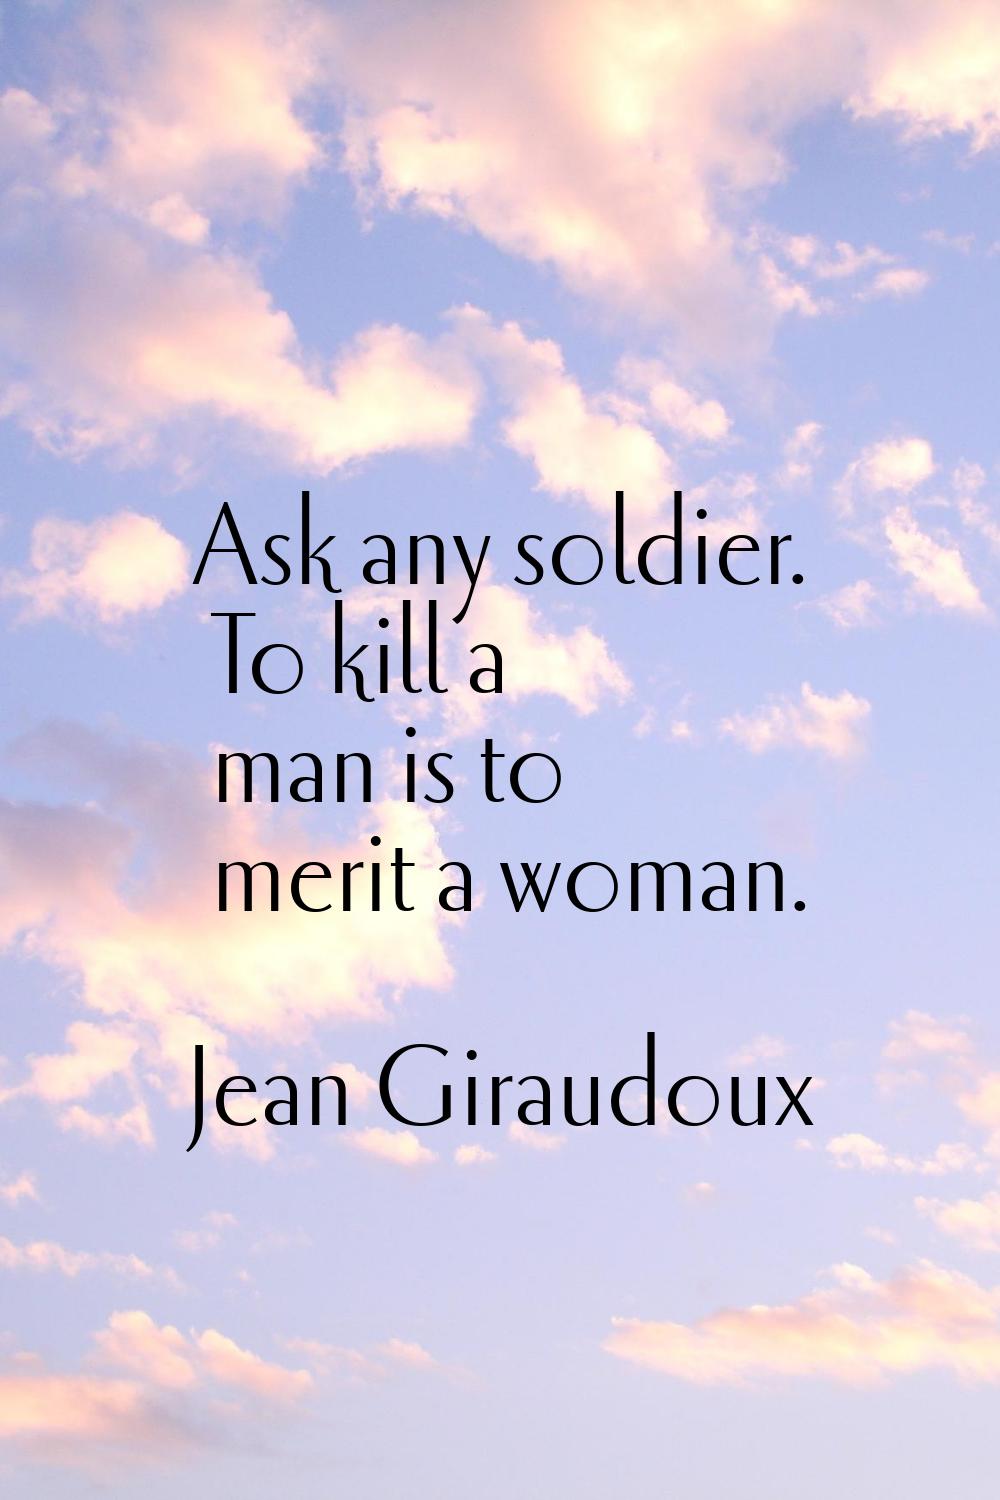 Ask any soldier. To kill a man is to merit a woman.